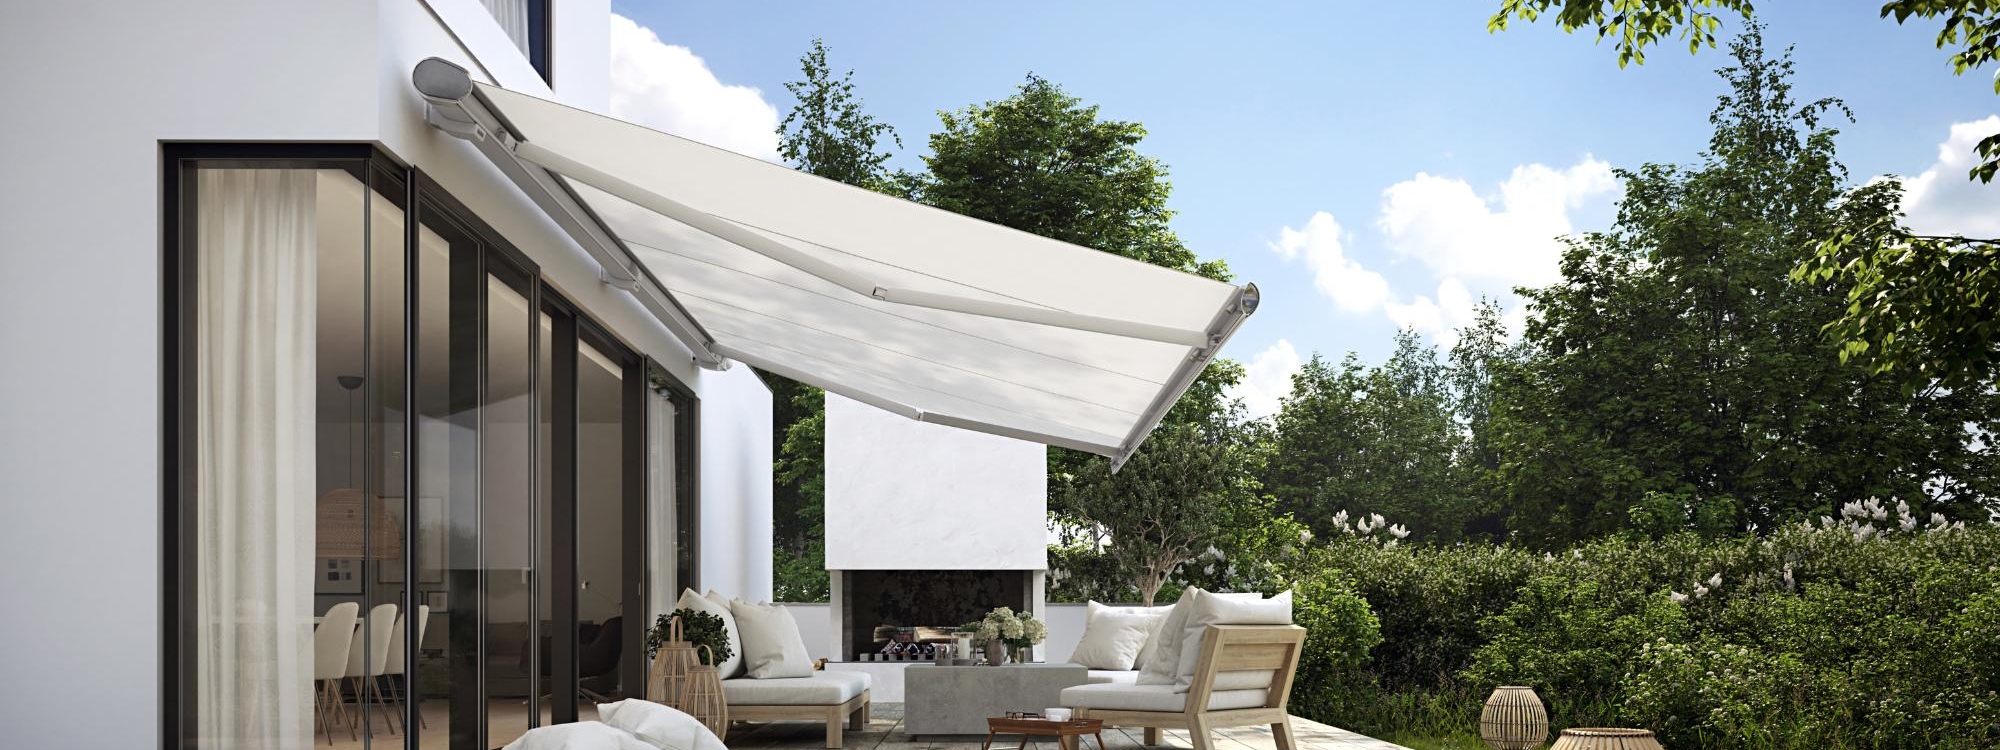 Markilux 6000 Retractable Awning 3